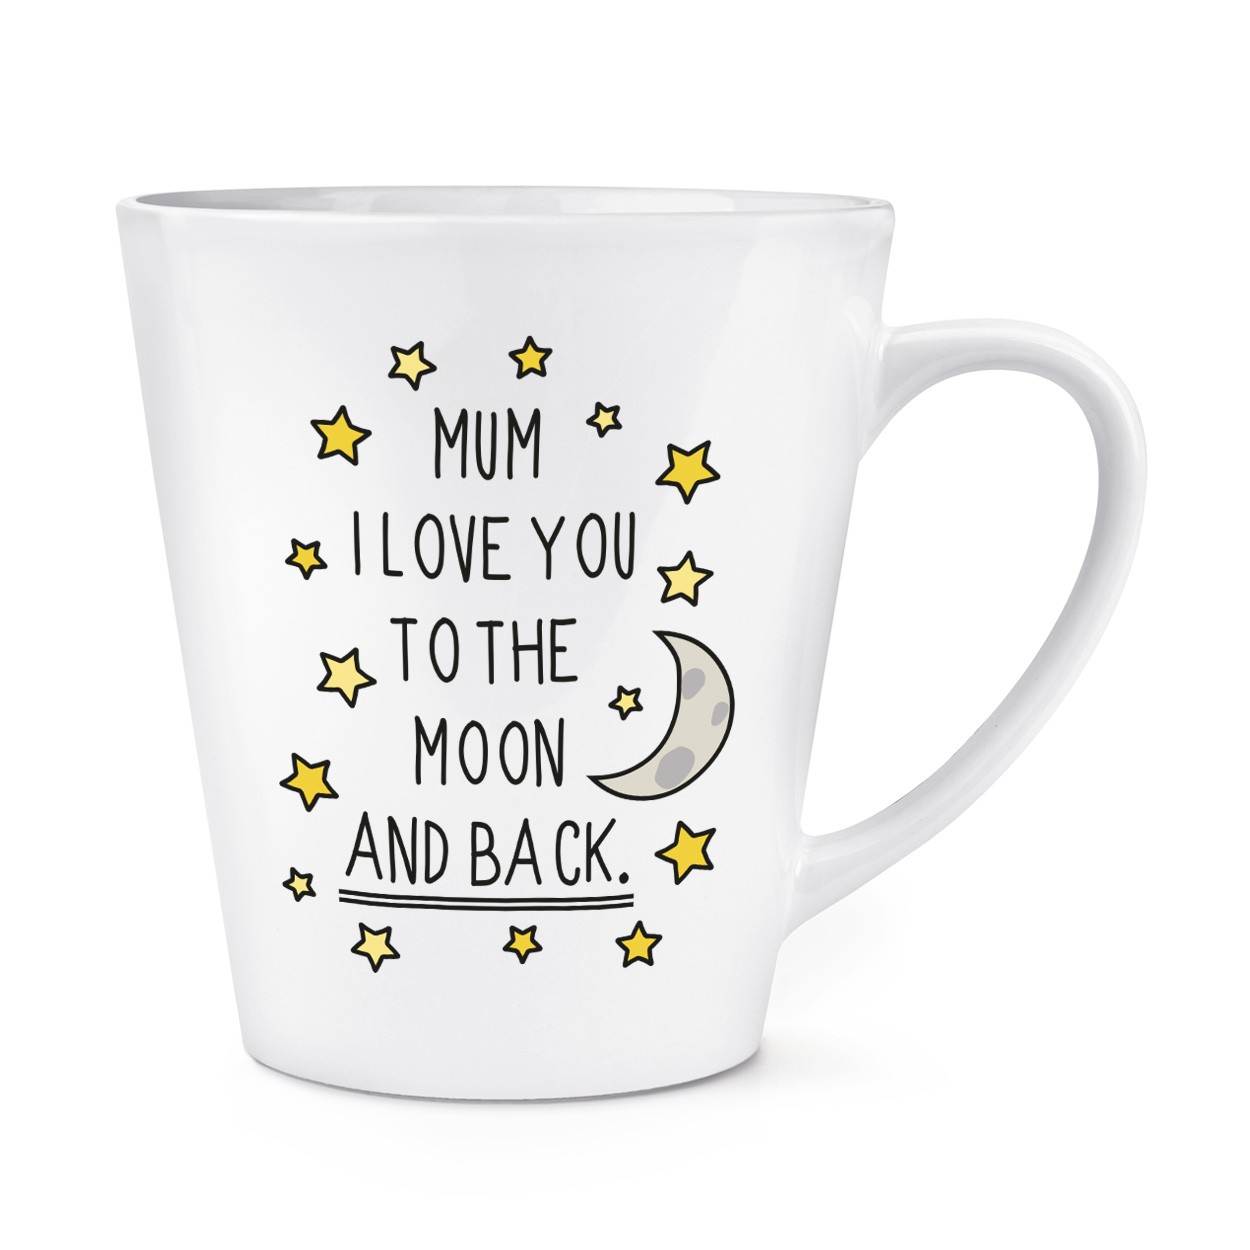 Mum I Love You To The Moon And Back 12oz Latte Mug Cup